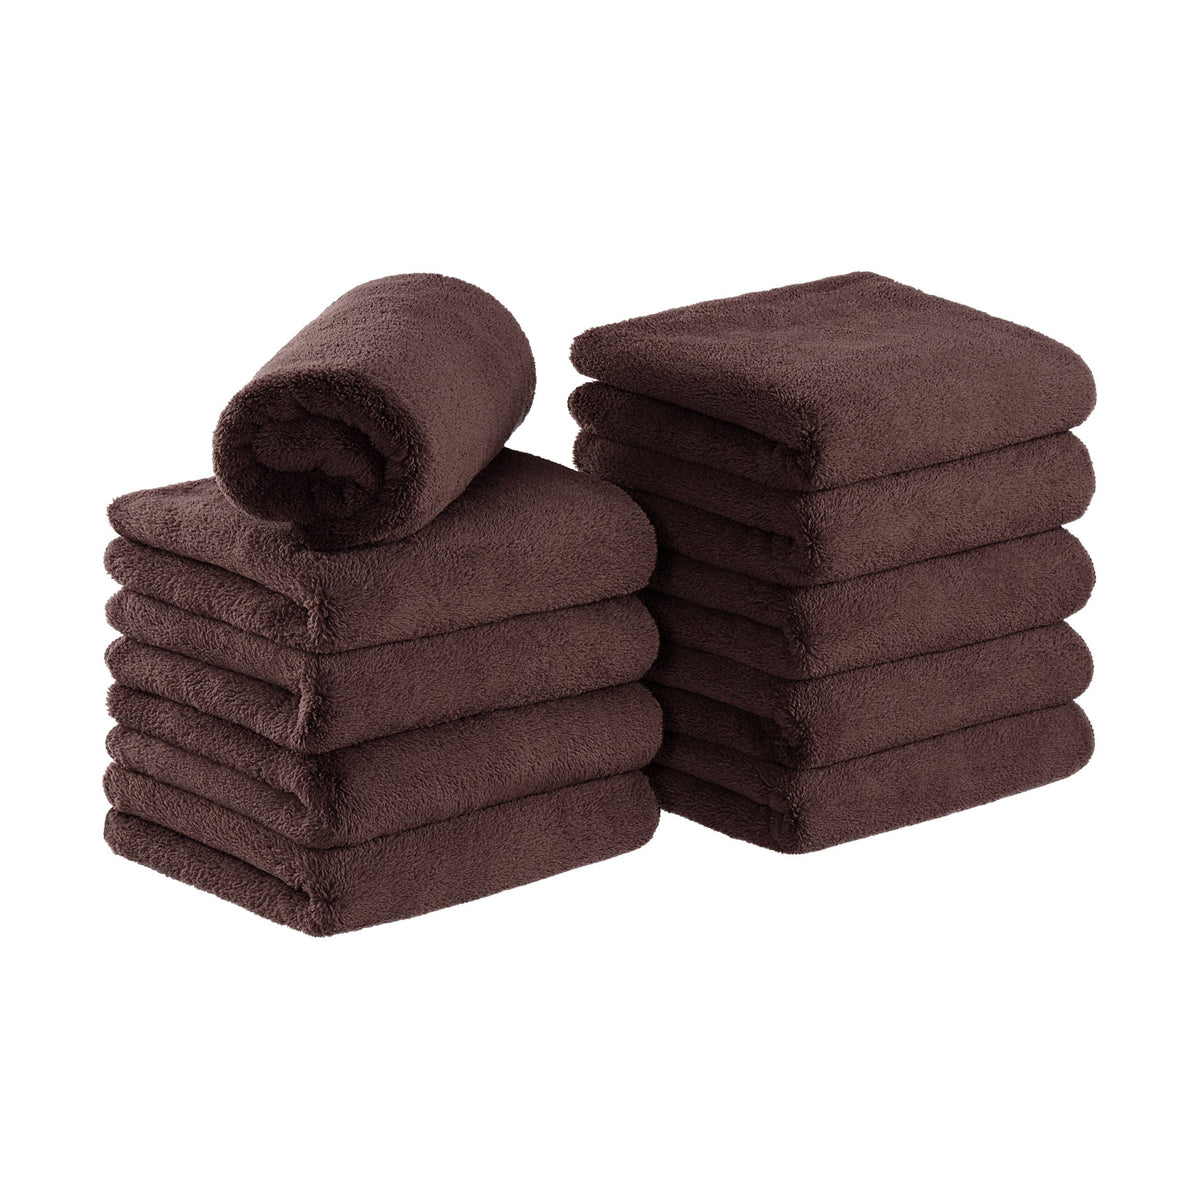 Bath Towels For Adults And Men Large Towels Coral Fleece, Strong